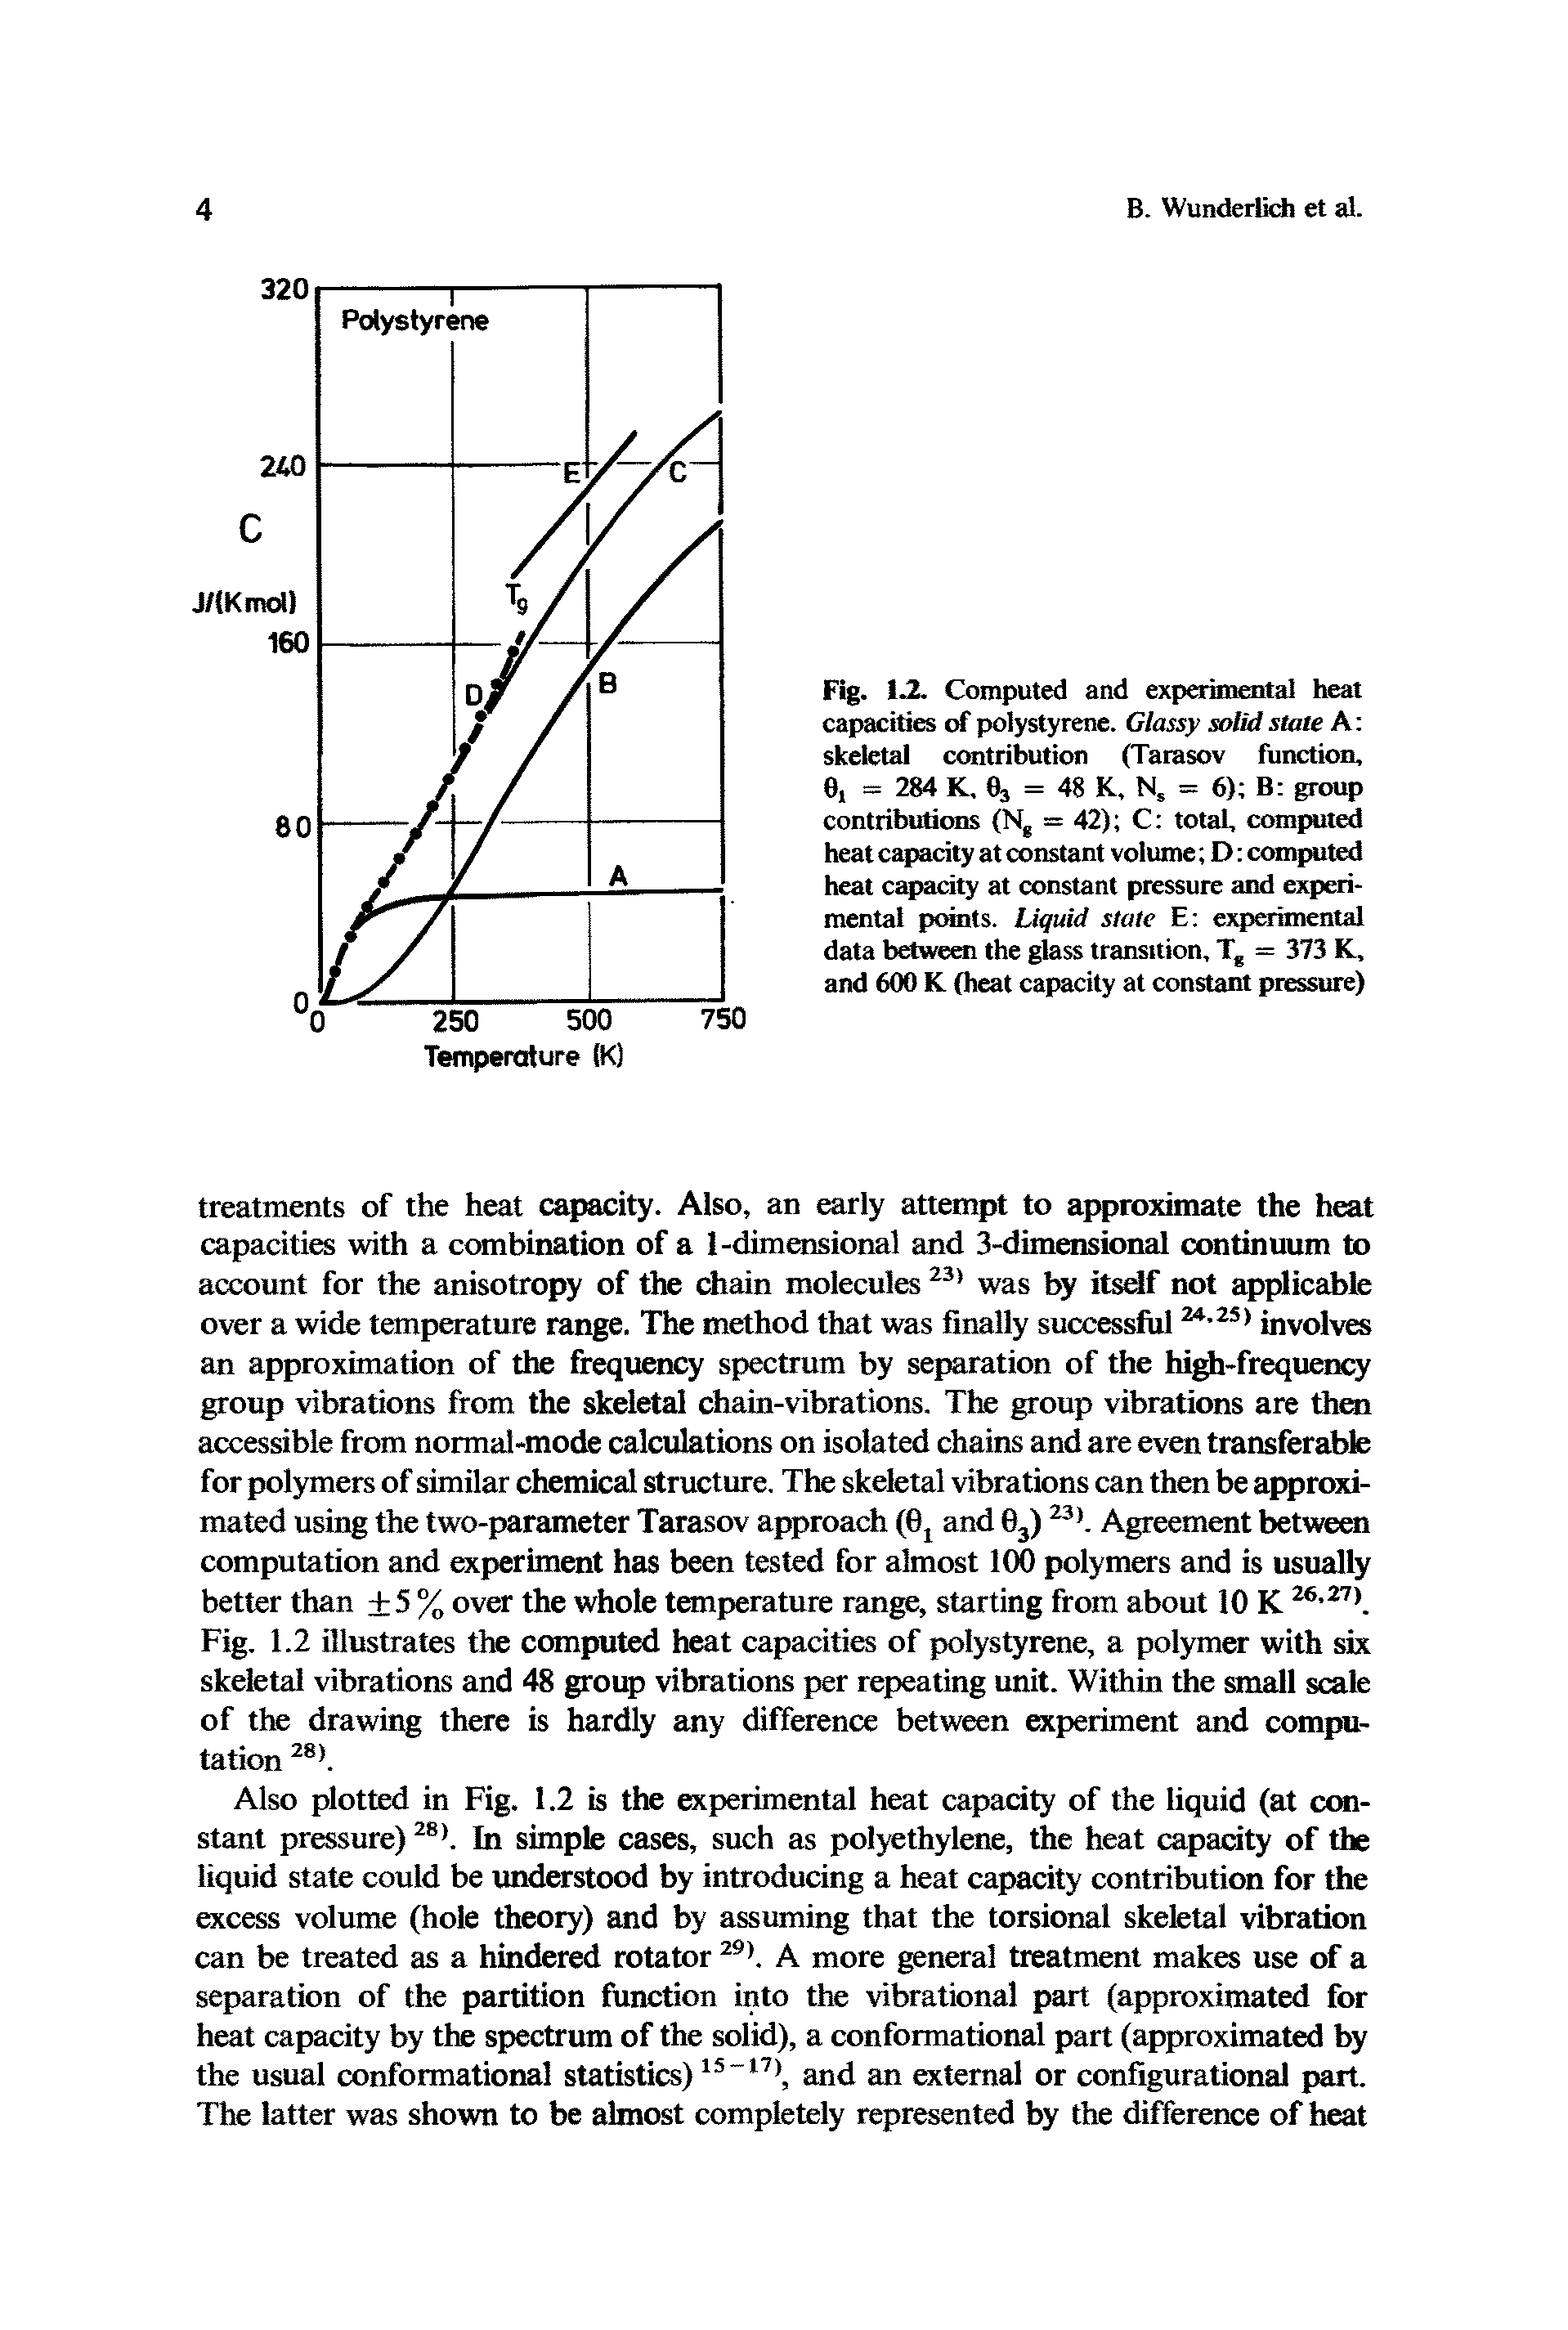 Fig. 1.2. Computed and experimental heat capacities rf polystyrene. Glassy solid state A skeletal contribution (Tarasov function, e, = 284 K, 6s = 48 K, H = 6) B group contributions (Ng = 42) C total, comjHited heat capacity at constant volume D computed heat capacity at constant pressure and experimental points. Liquid state E experimental data between the glass transition, Tg = 373 K, and 600 K (heat capacity at constant pressure)...